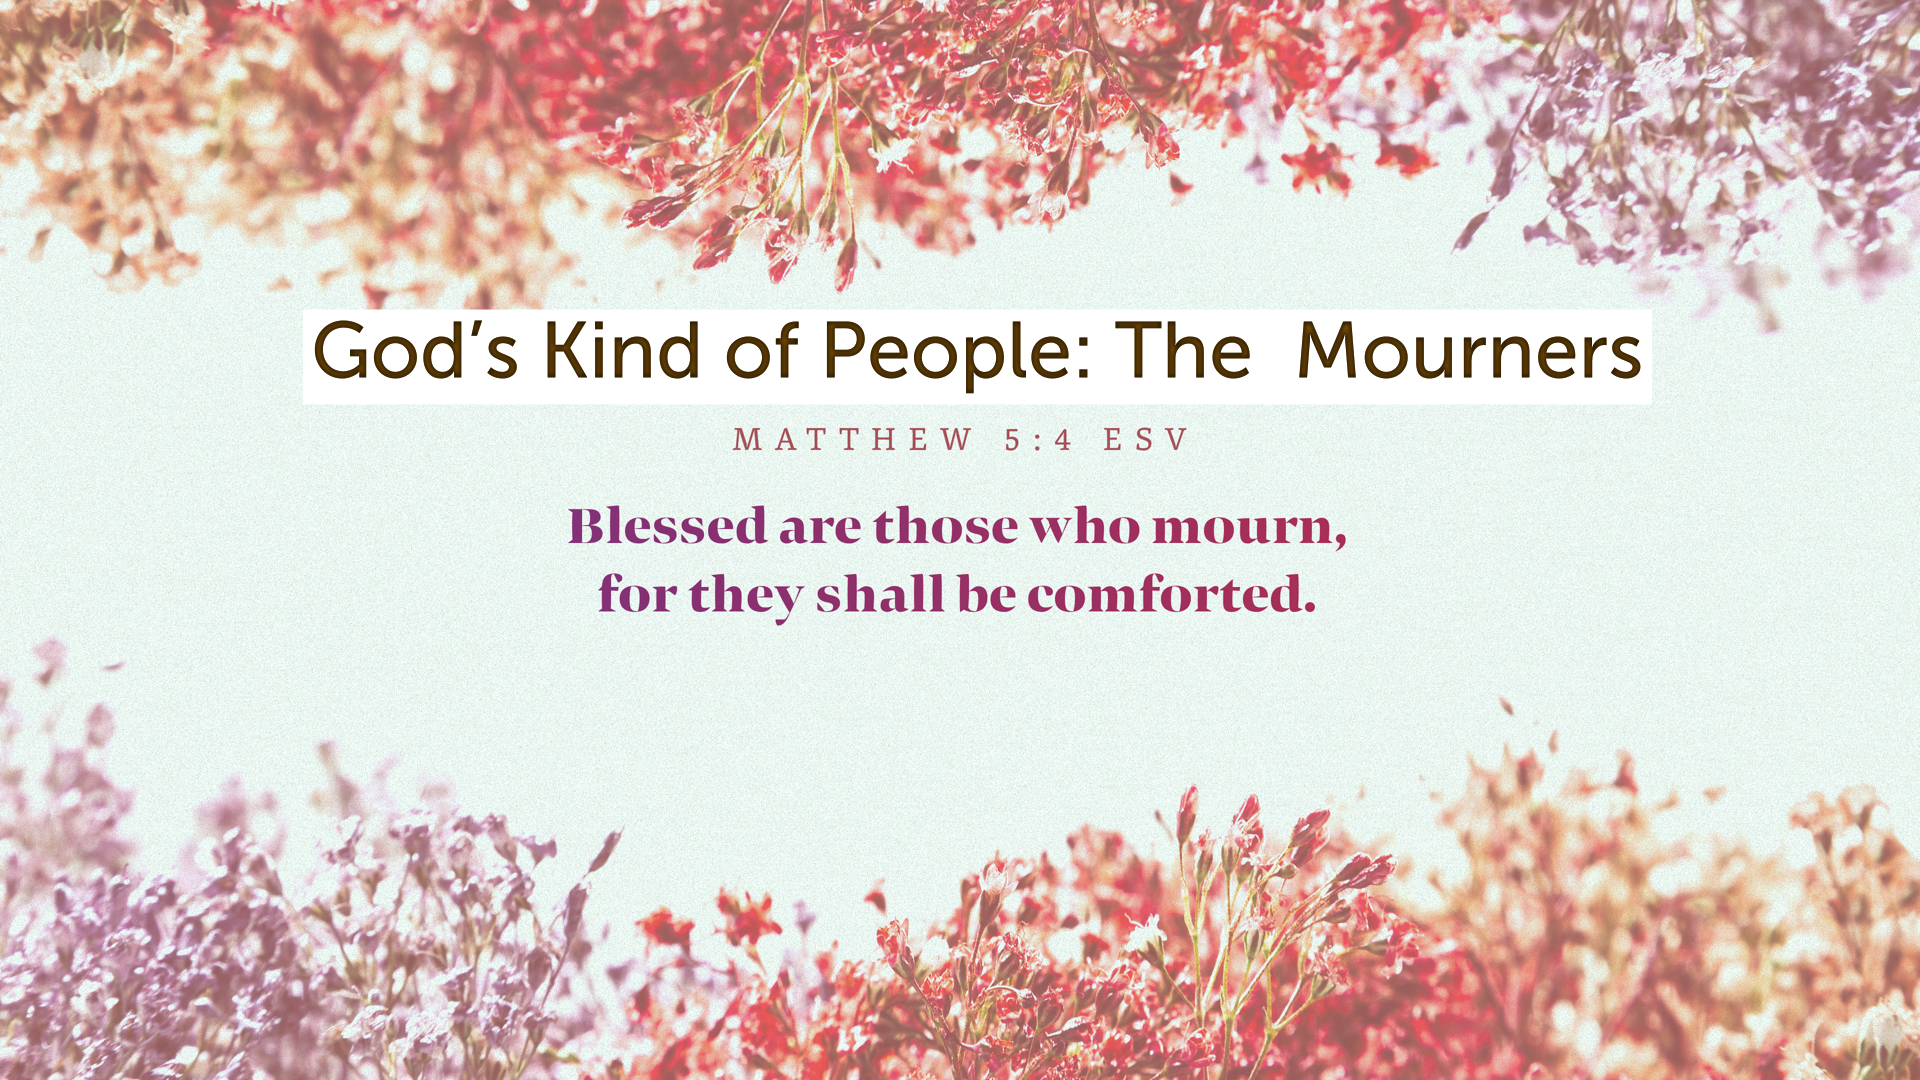 Oct 23, 2022 - God's Kind of People: The Mourners (Video) - Matthew 5: 4